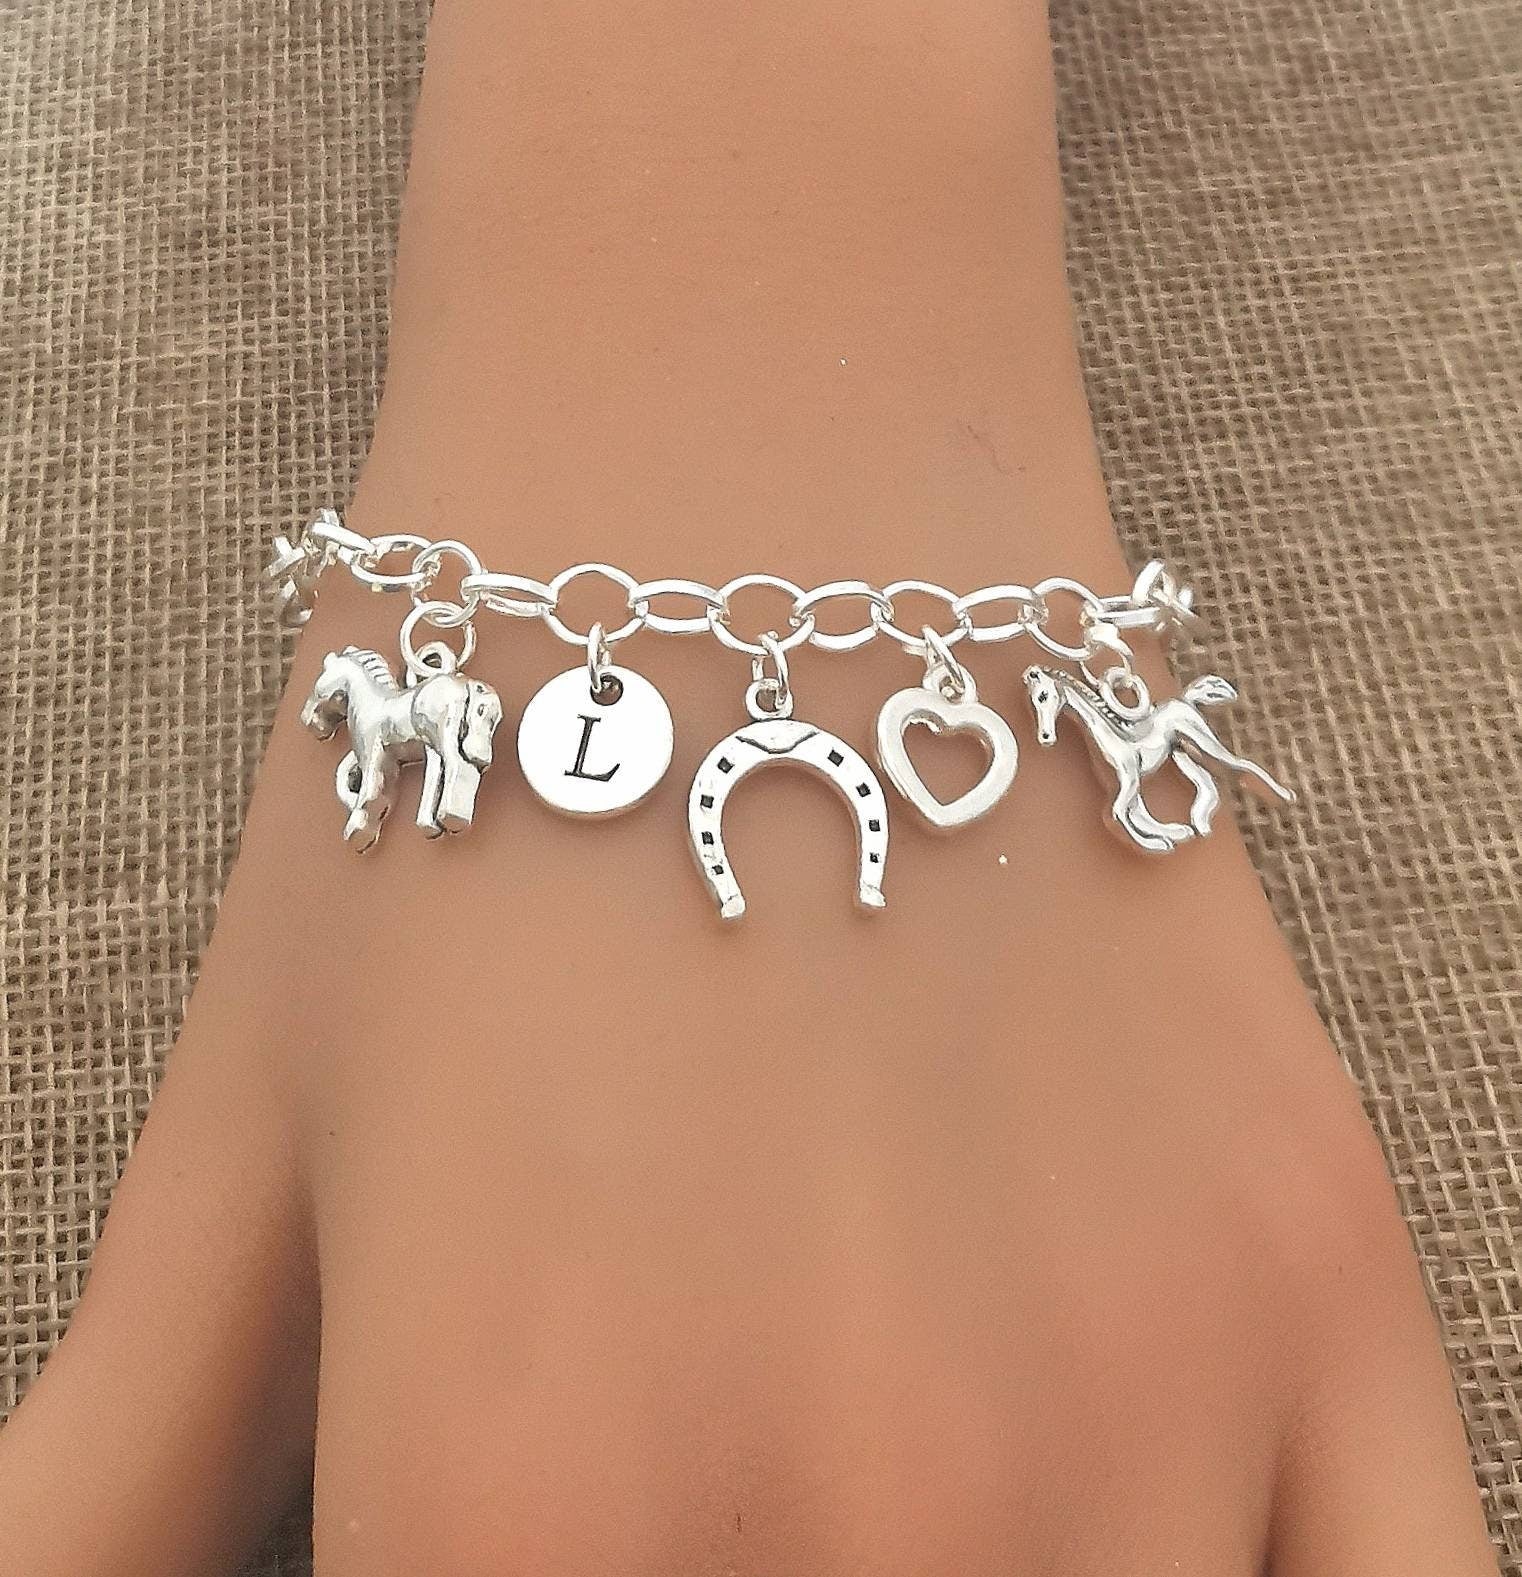 Horse gifts for women, Horse gifts for girl, Gift for Horse Lover, Horse Bracelet, Gift for Horse Rider, Horse Bracelet, Horse Lover, Pony